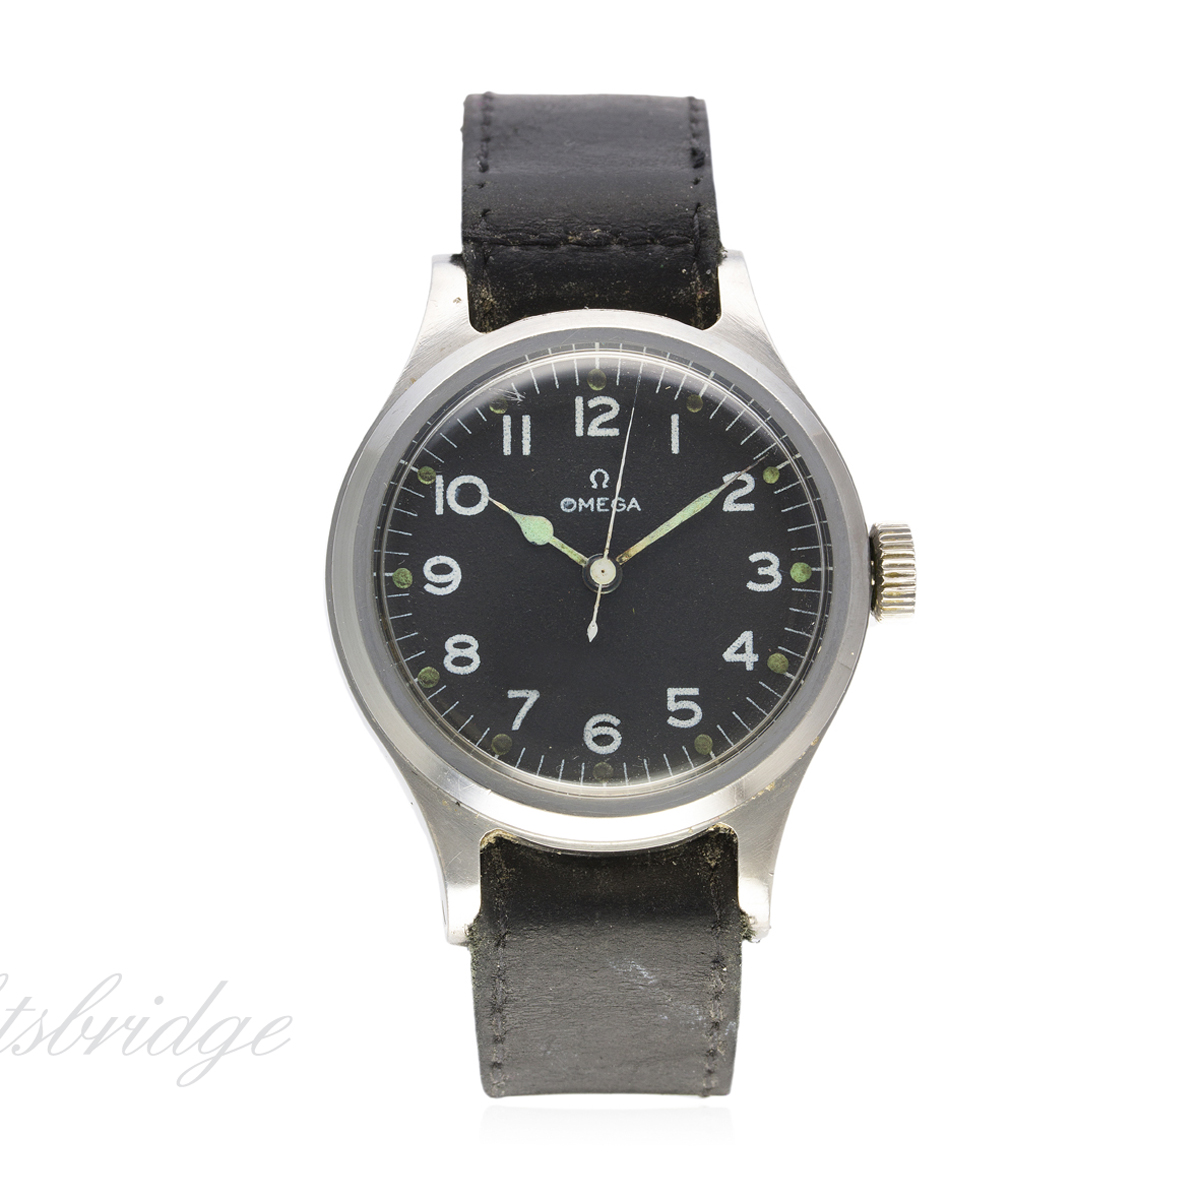 A GENTLEMAN'S STAINLESS STEEL BRITISH MILITARY RAF OMEGA PILOTS WRIST WATCH DATED 1956
D: Black dial